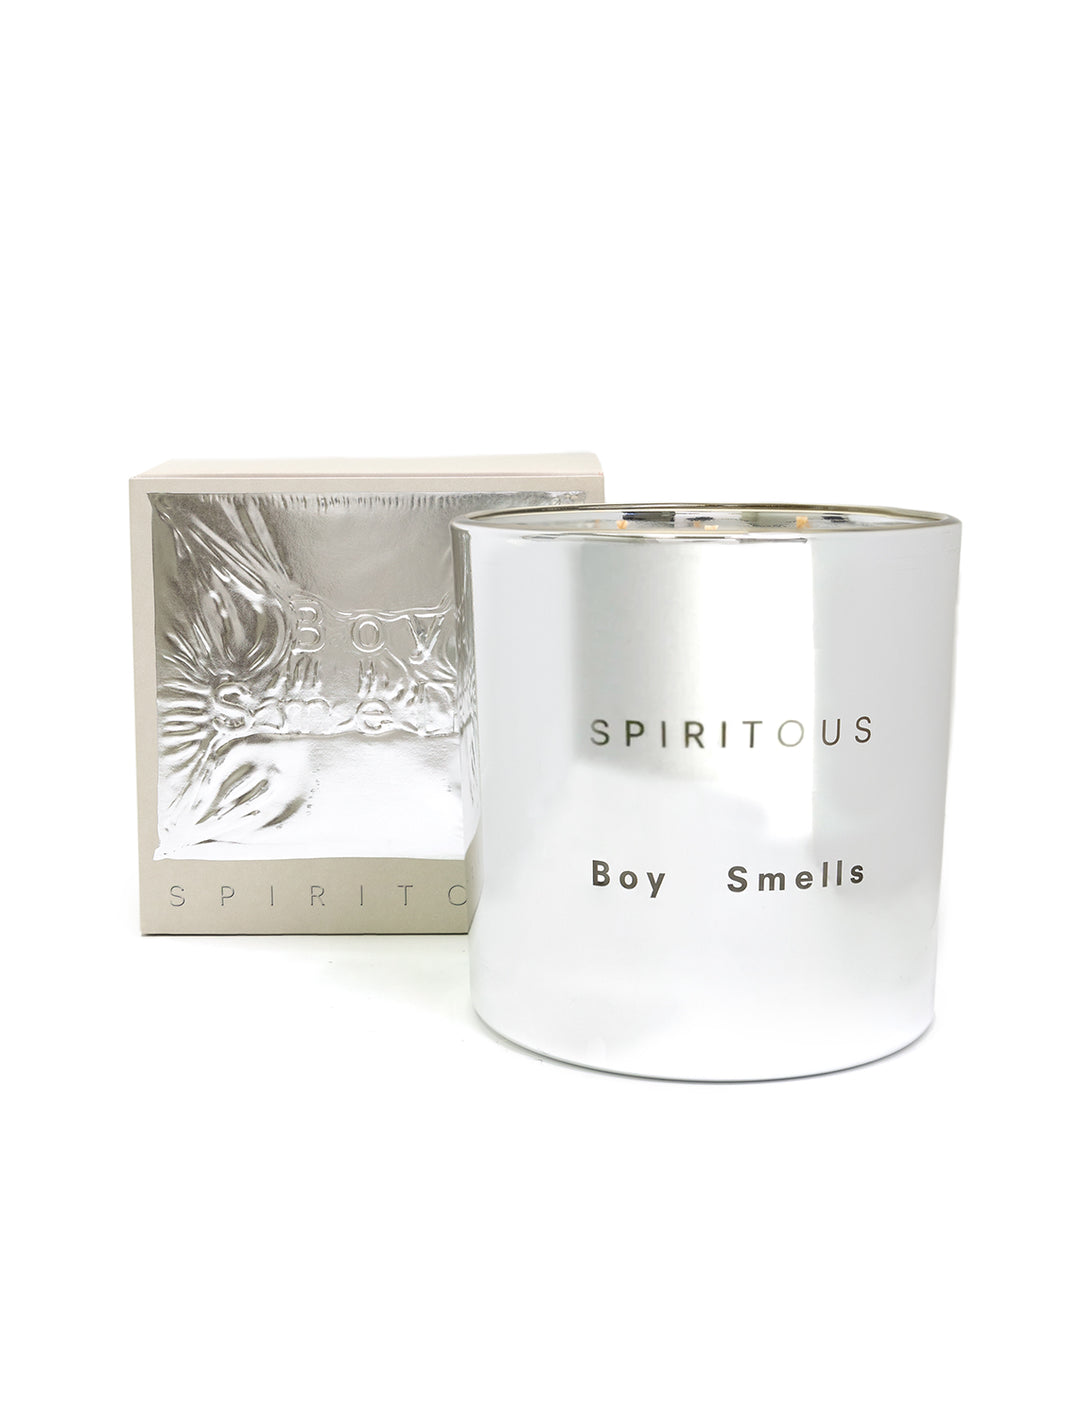 Boy Smells' spiritous magnum candle packaging photo.